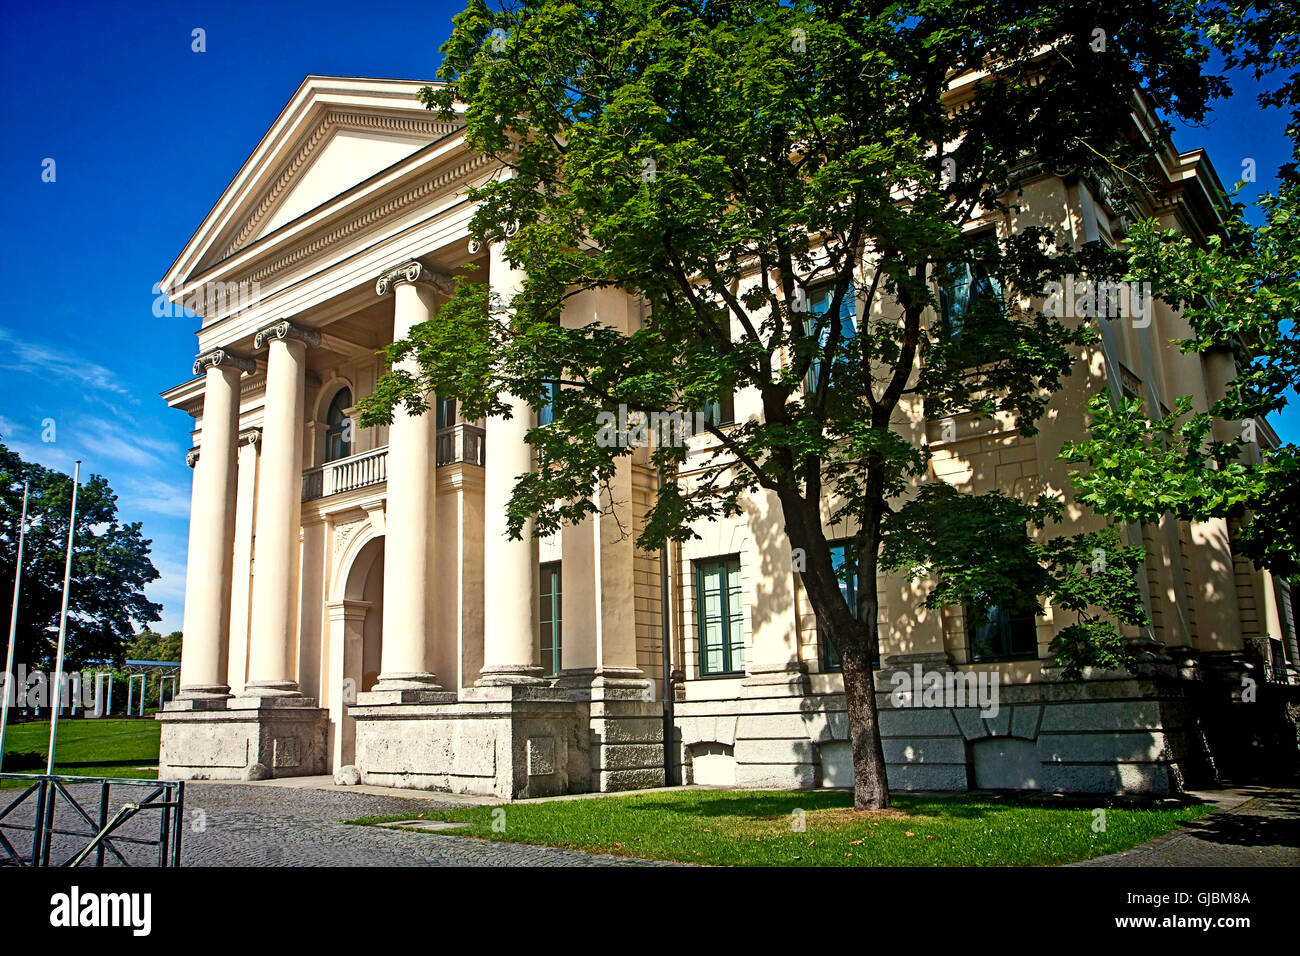 Munich, Germany - Prinz Carl Palais built in 1806 in Neoclassical style Stock Photo